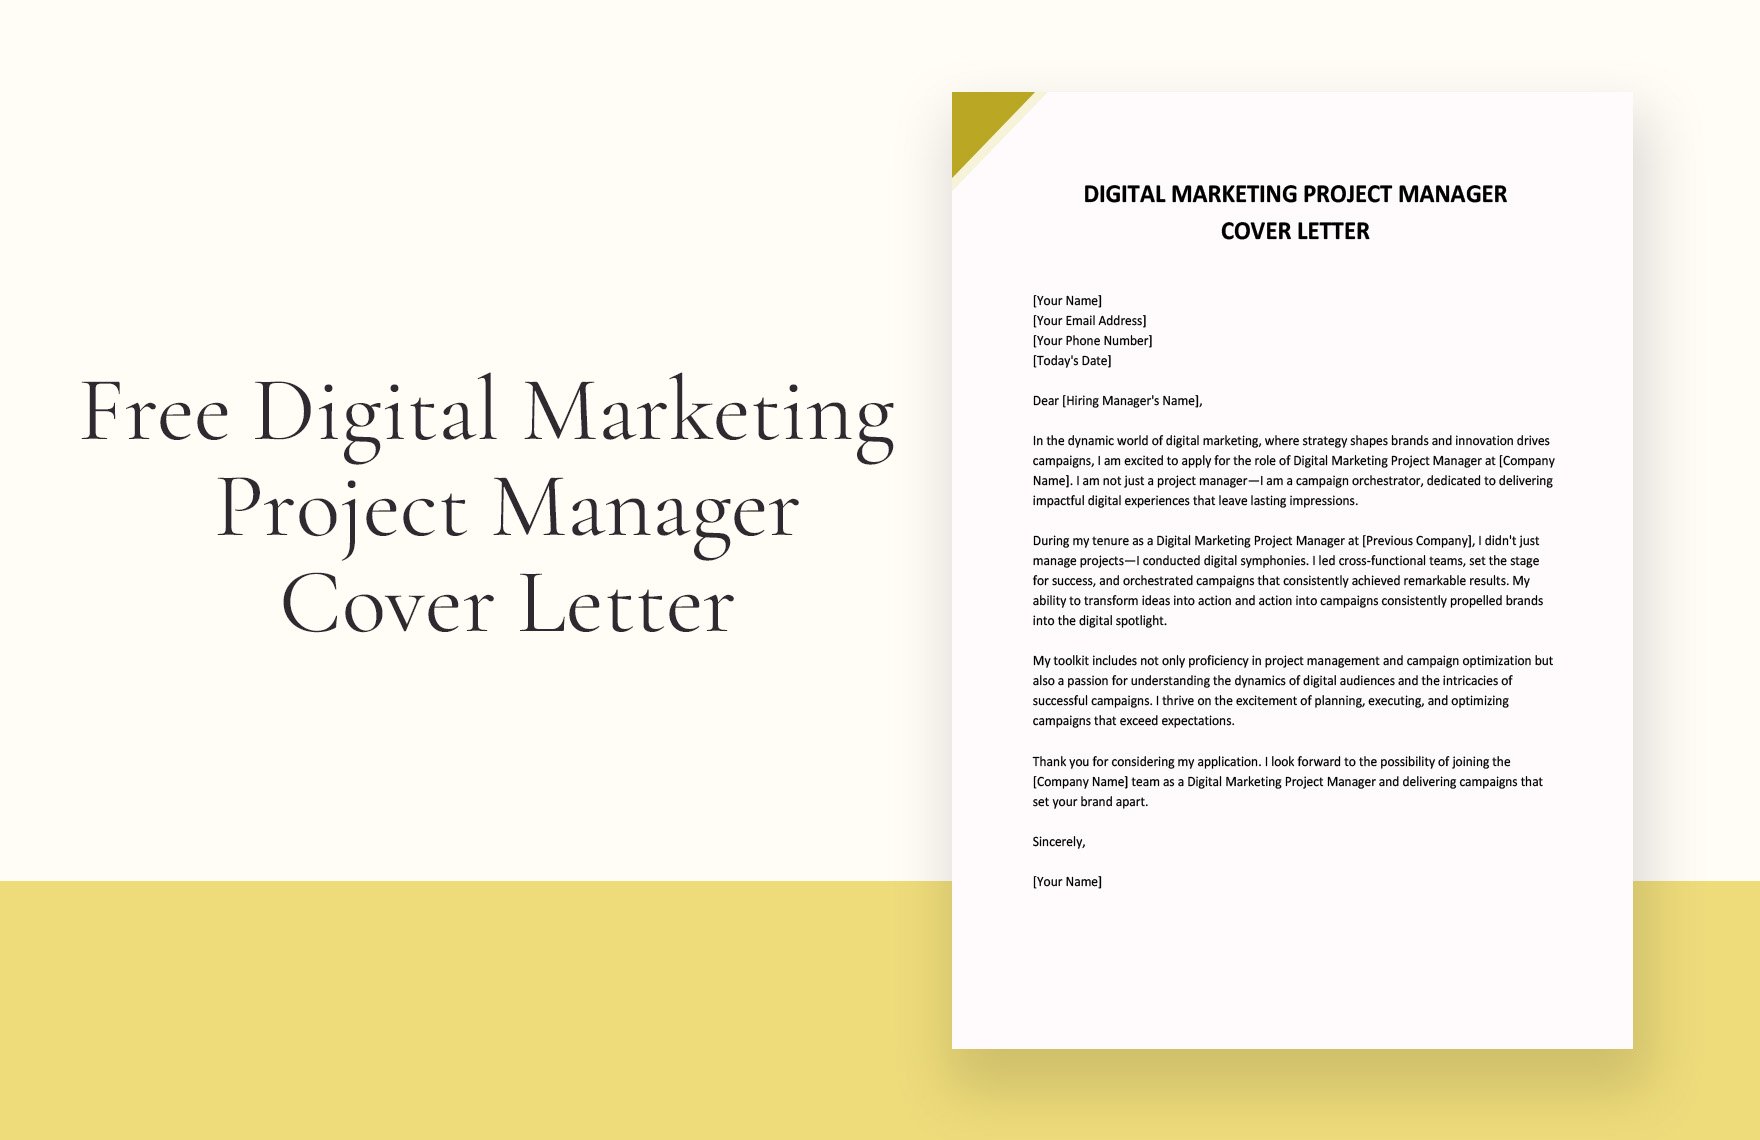 Digital Marketing Project Manager Cover Letter in Word, Google Docs